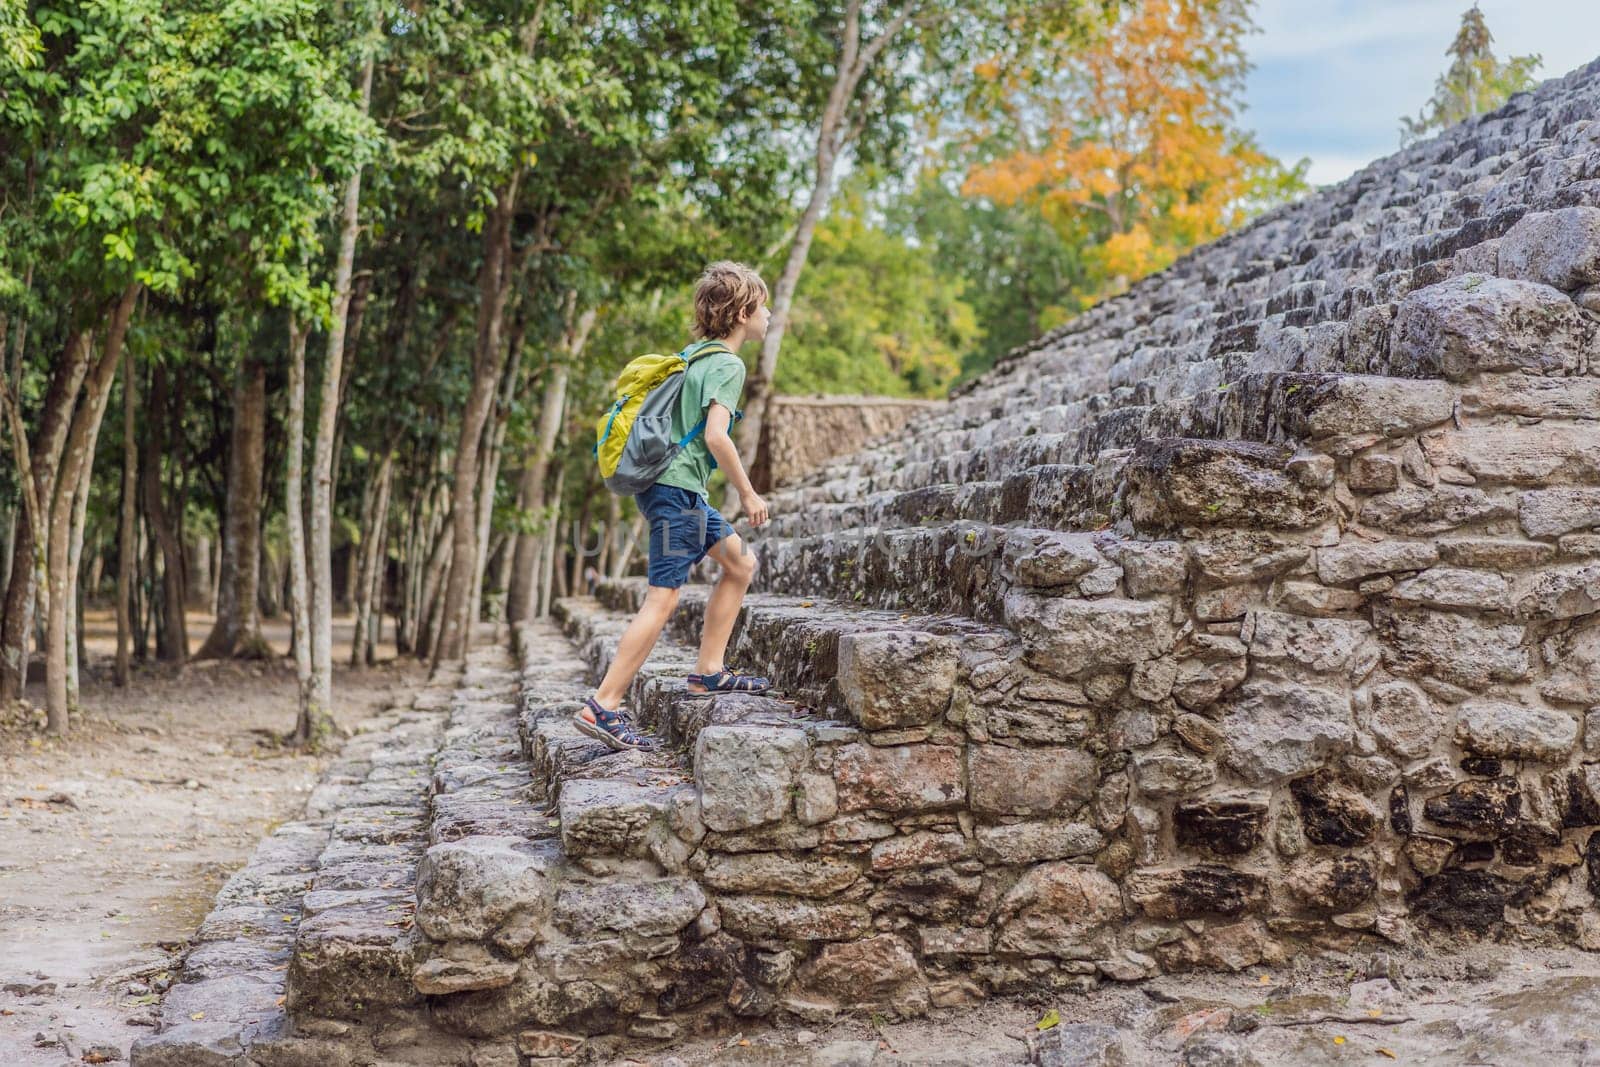 Boy tourist at Coba, Mexico. Ancient mayan city in Mexico. Coba is an archaeological area and a famous landmark of Yucatan Peninsula. Cloudy sky over a pyramid in Mexico by galitskaya